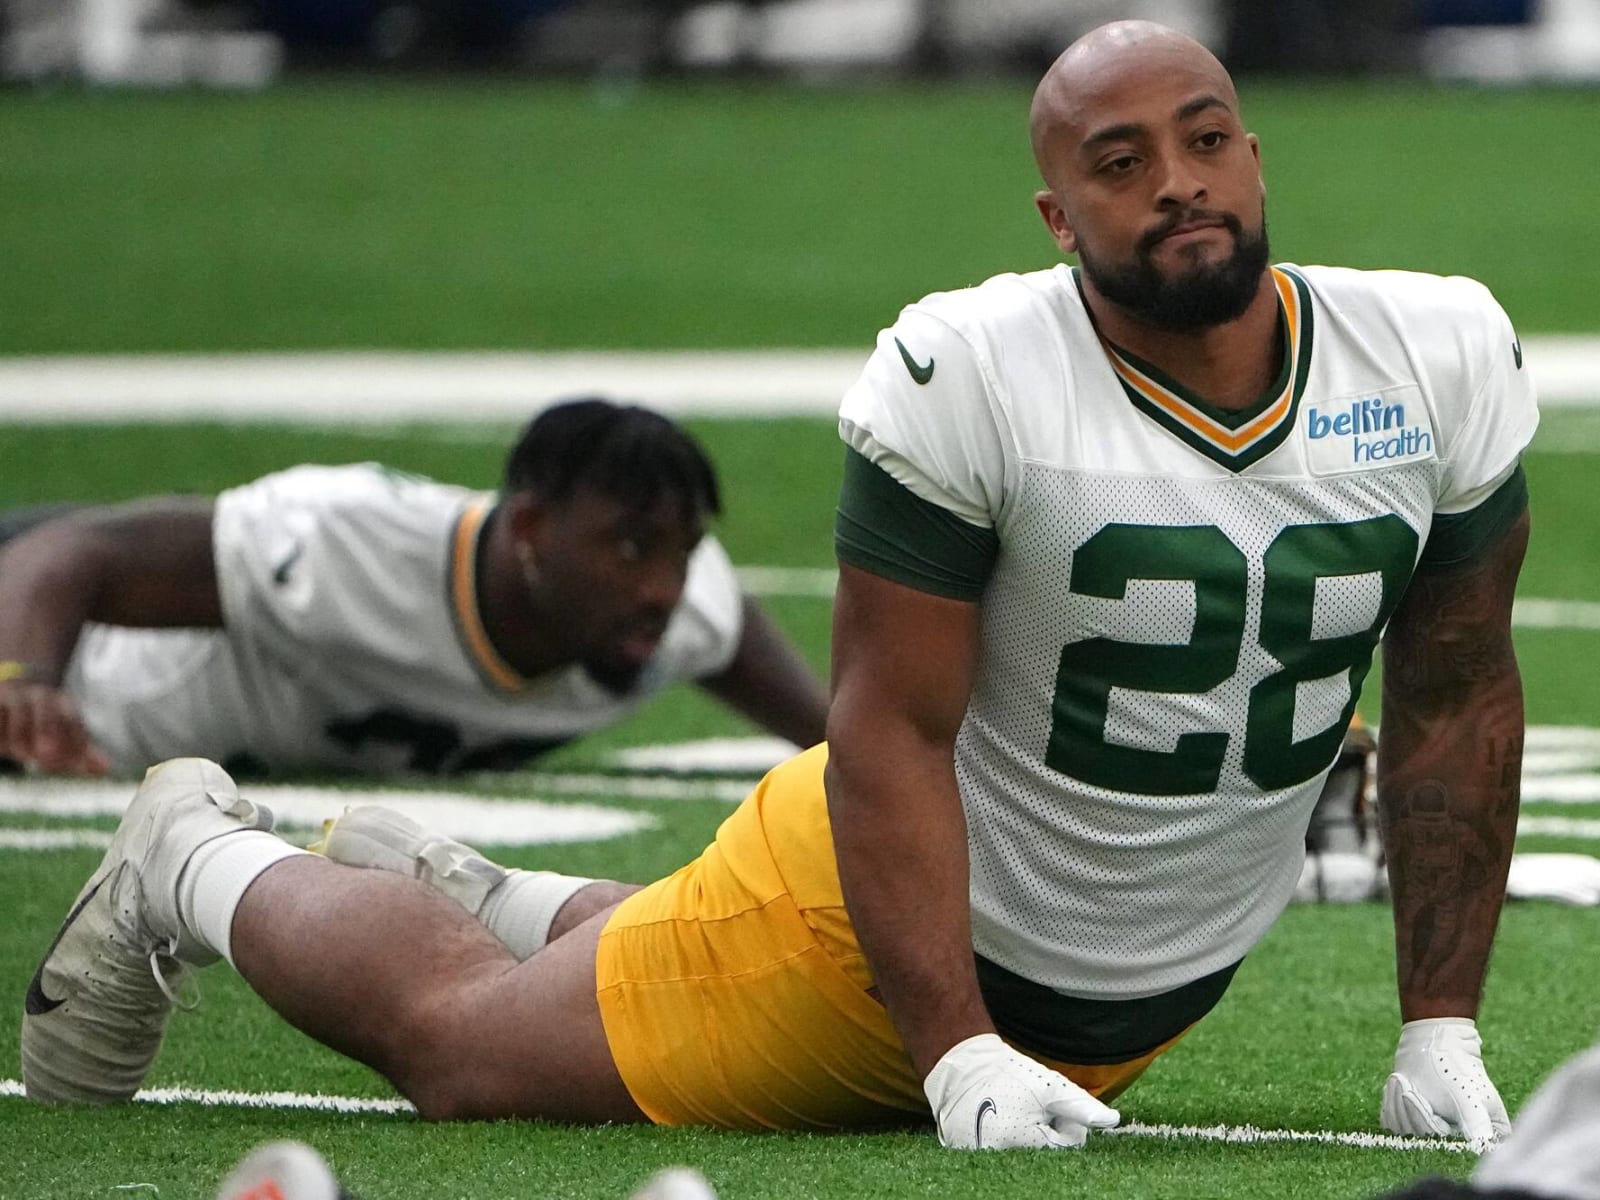 Packers' AJ Dillon grabbed by officer at soccer game, Green Bay